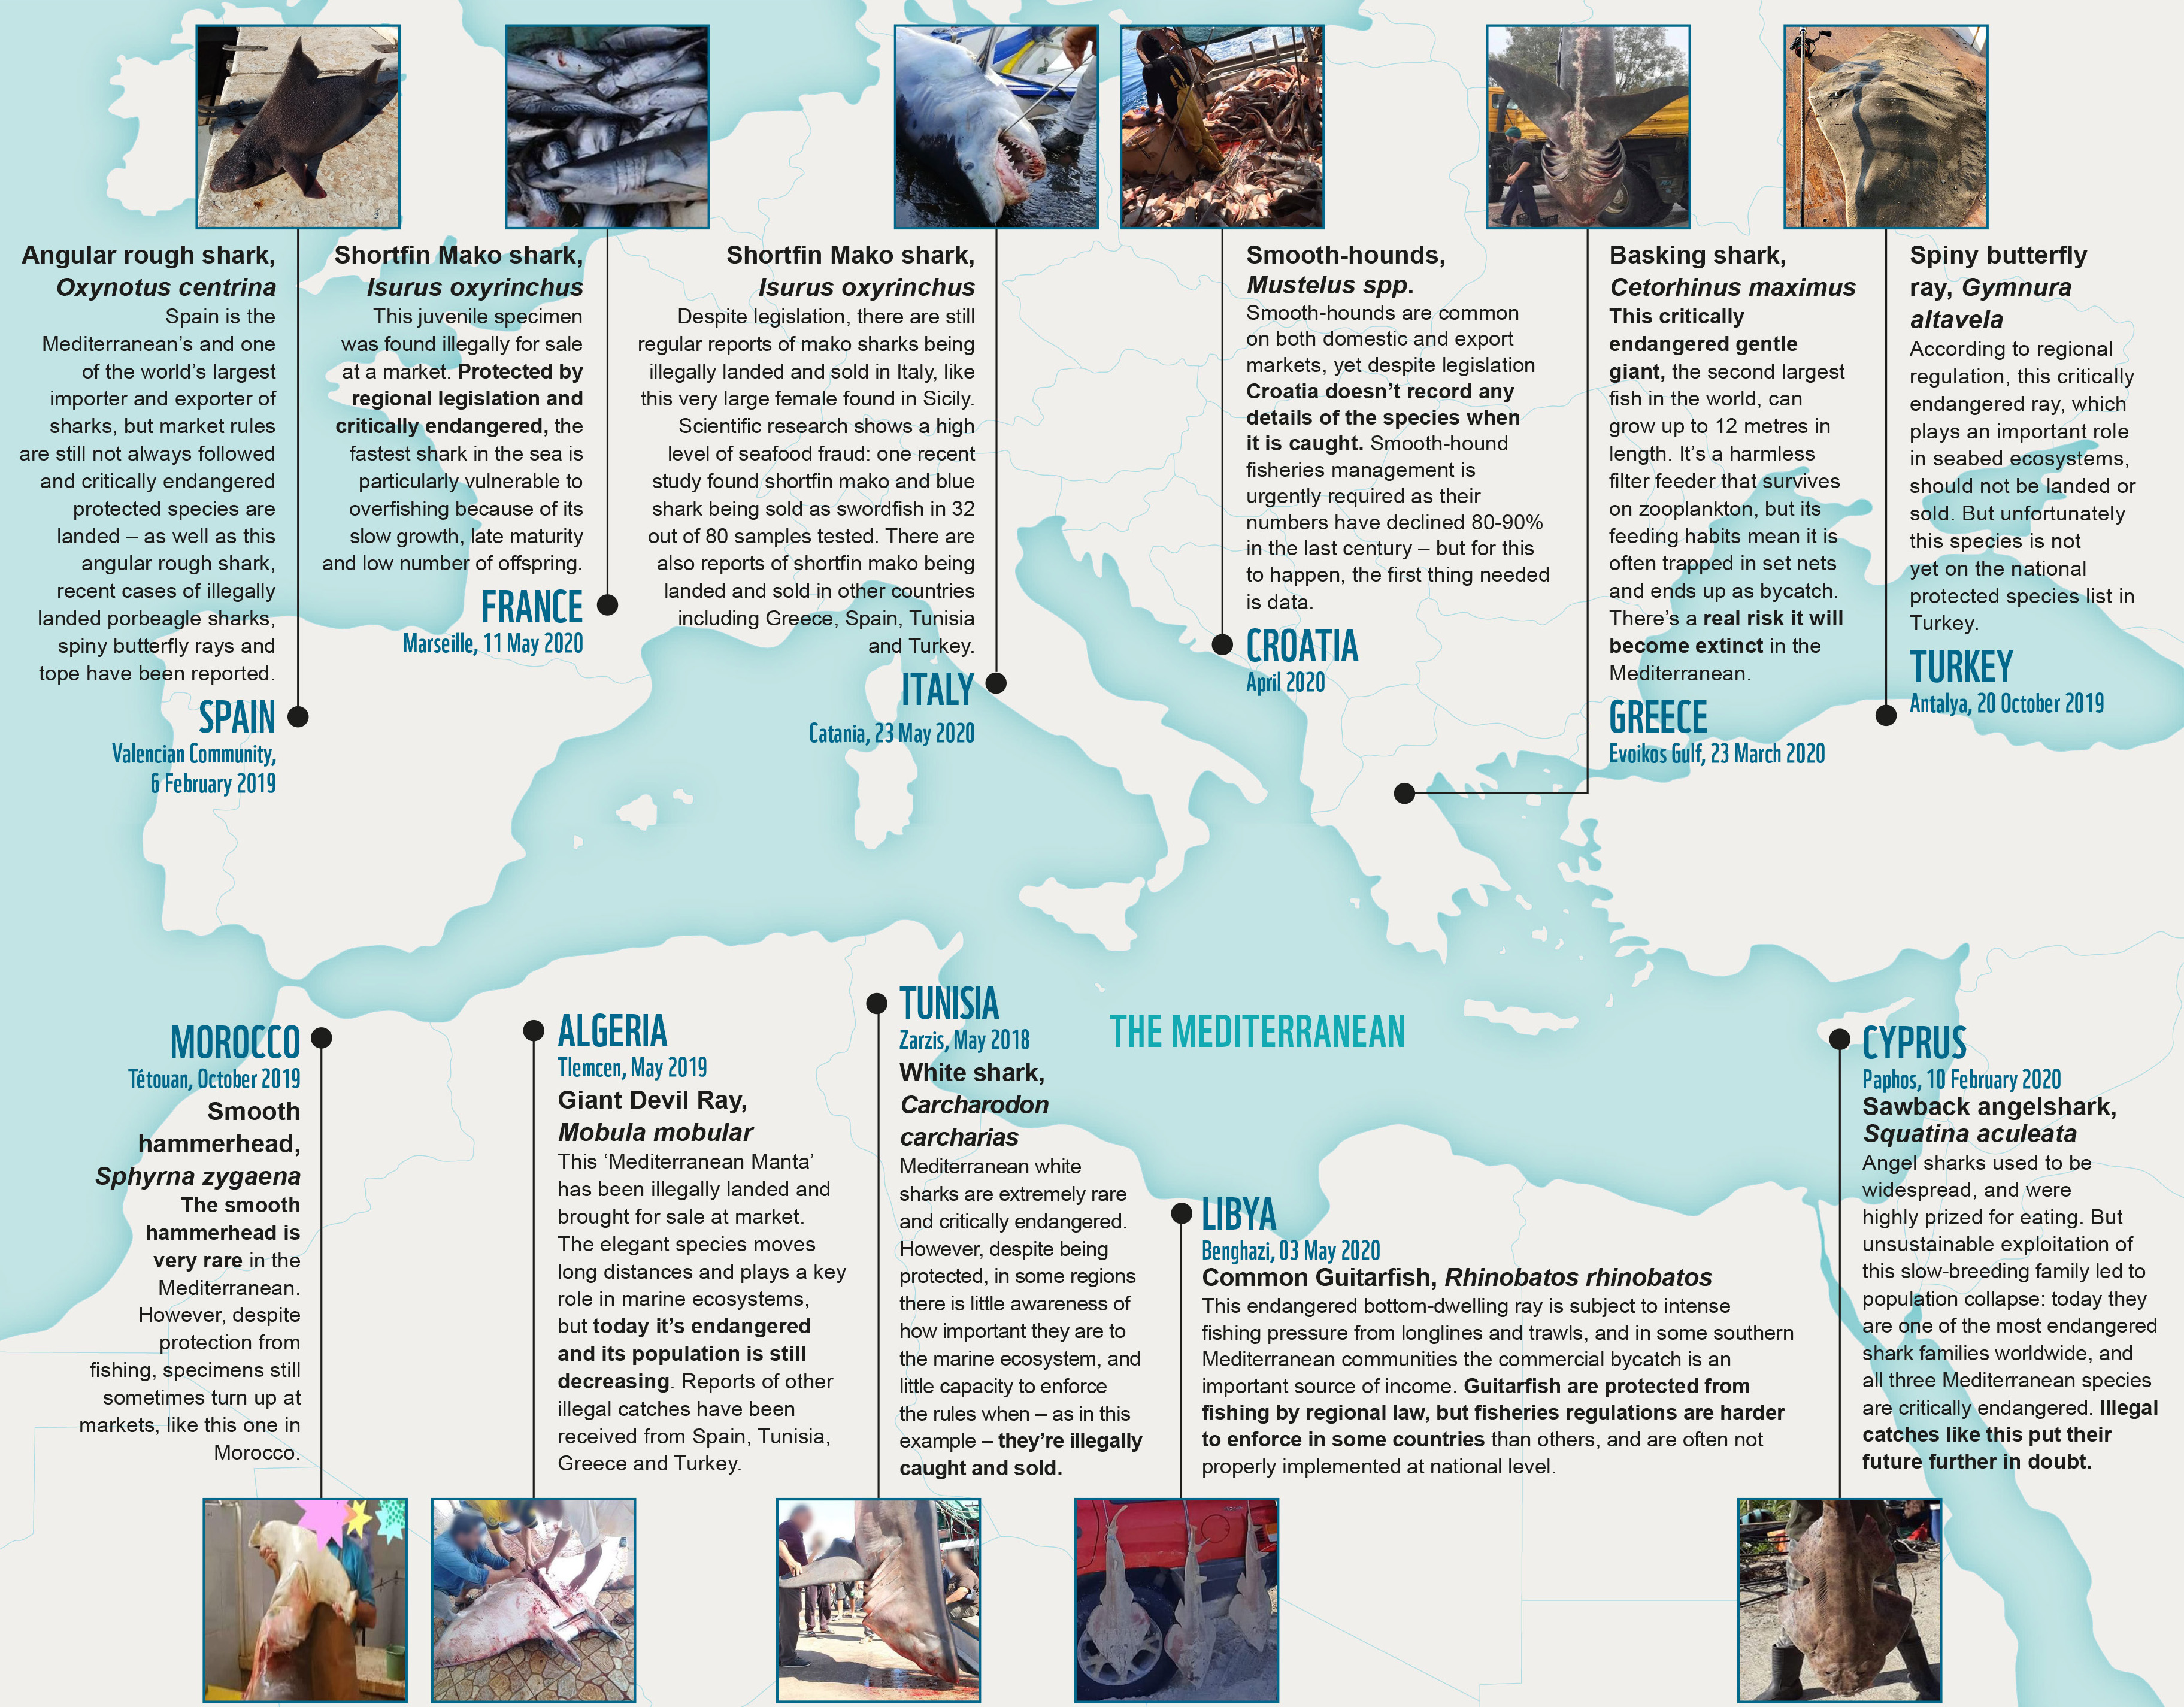 Wwf Mediterranean Marine Initiative Breaking Compelling Reports Obtained By Wwf Confirms Deadly Harvest Of Endangered Sharks Rays Illegally Fished In 11 Mediterranean Countries More Awareness Among Fishers Against Bycatch